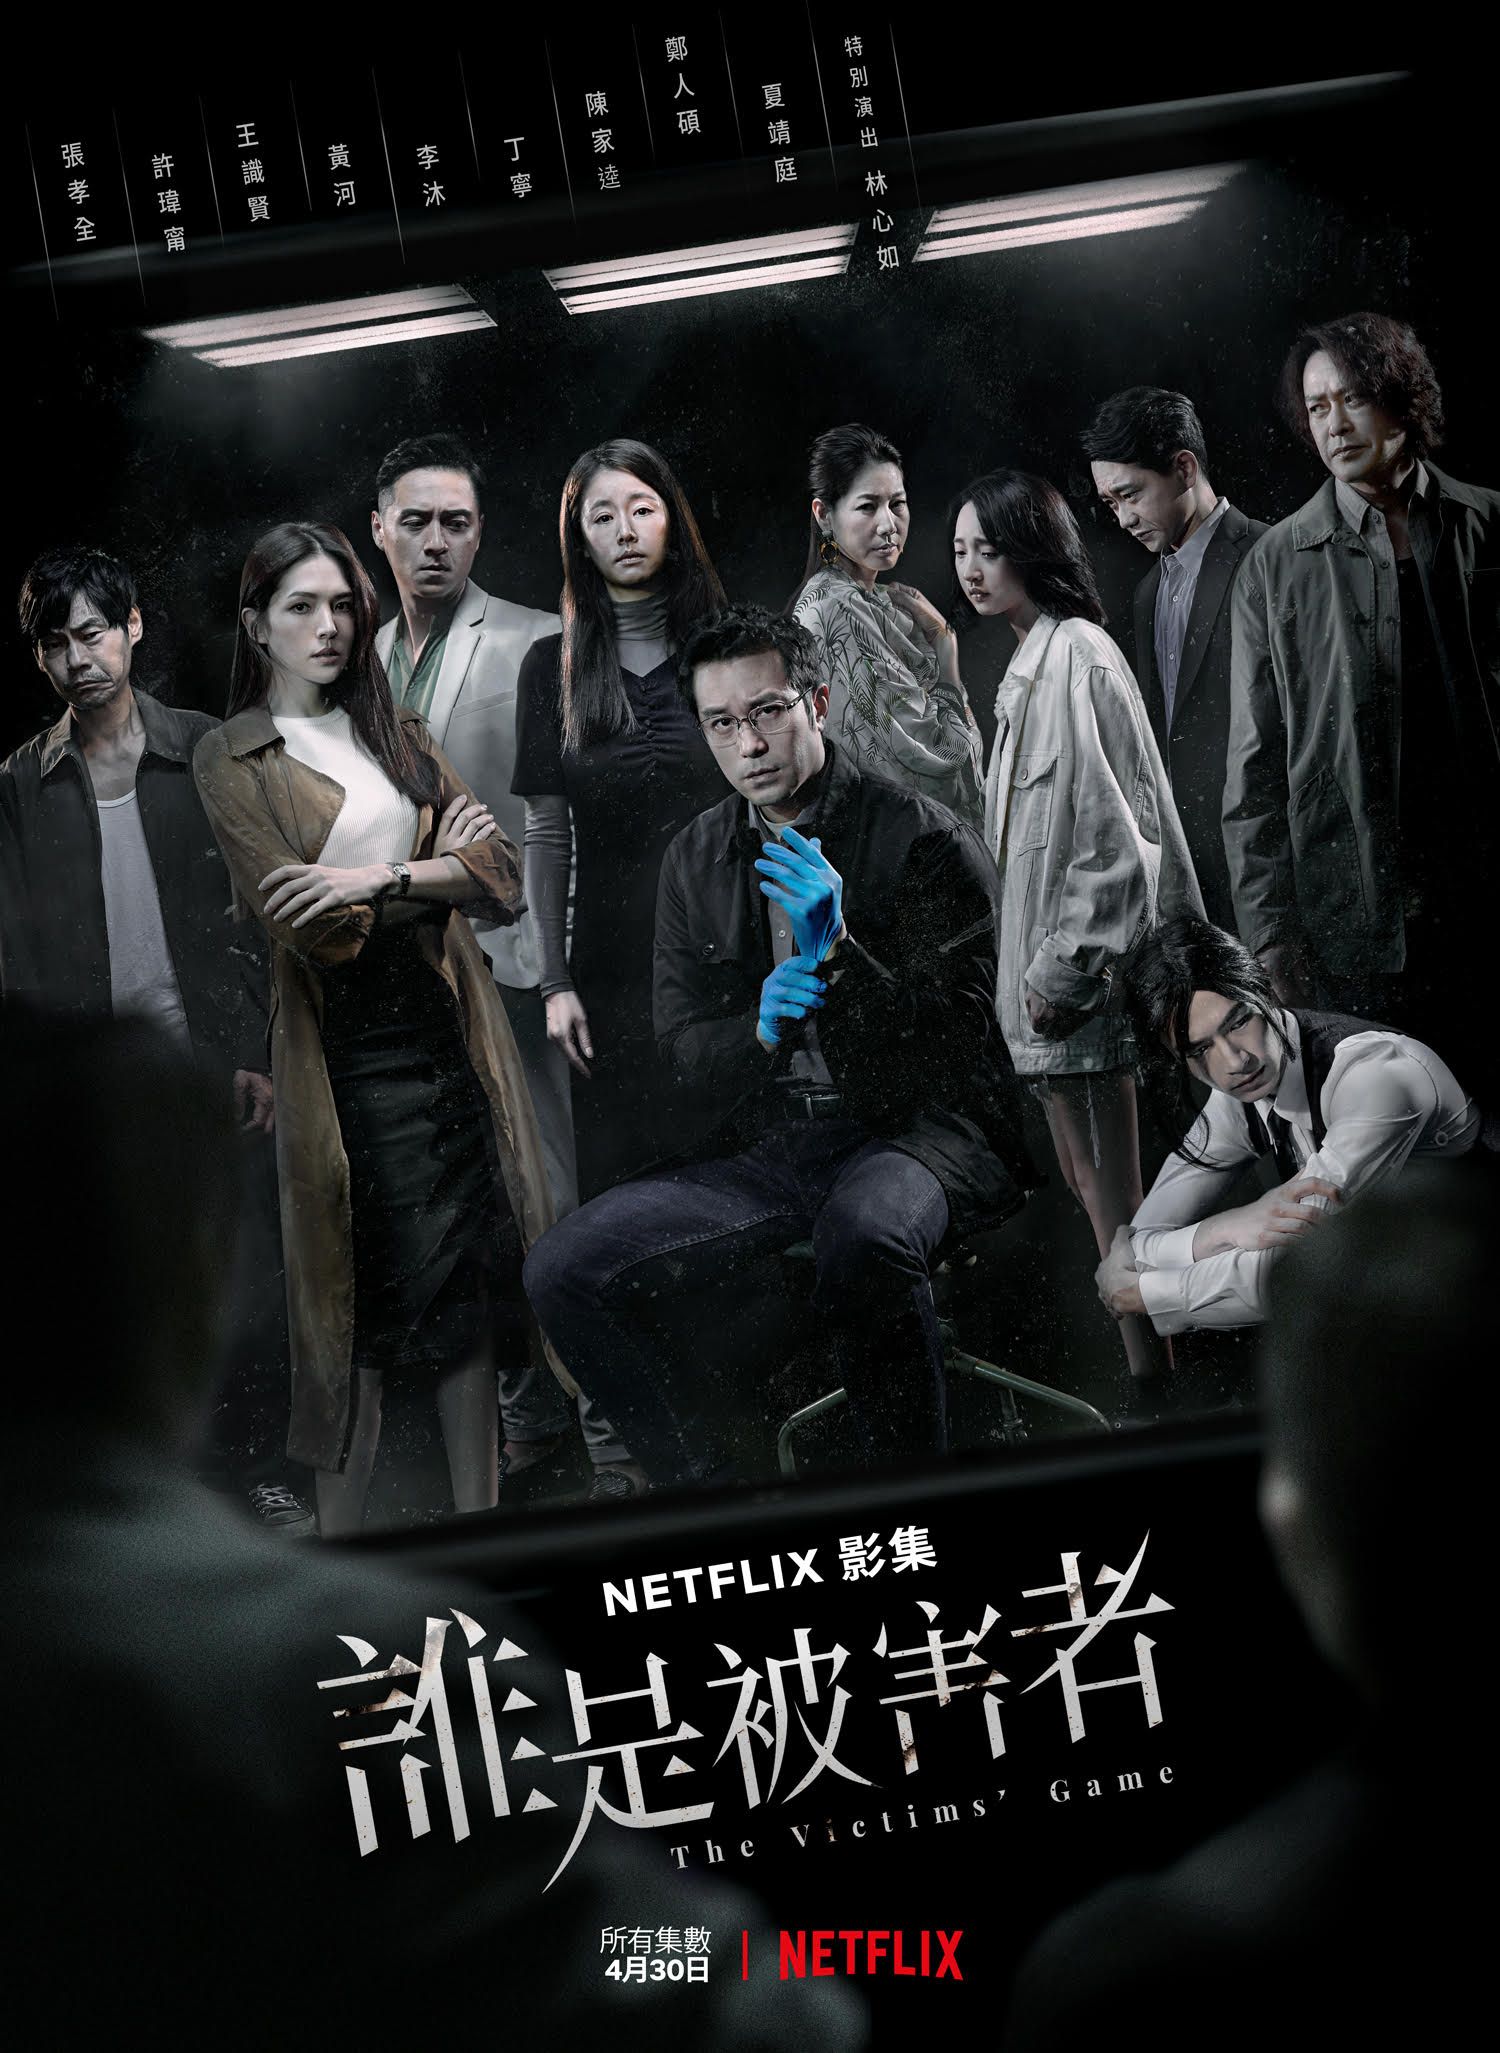 In 2018, BAMID financial assistance for production of TV drama series “The Victims' Game” (Courtesy of Greener Grass Production Co., Ltd).jpg